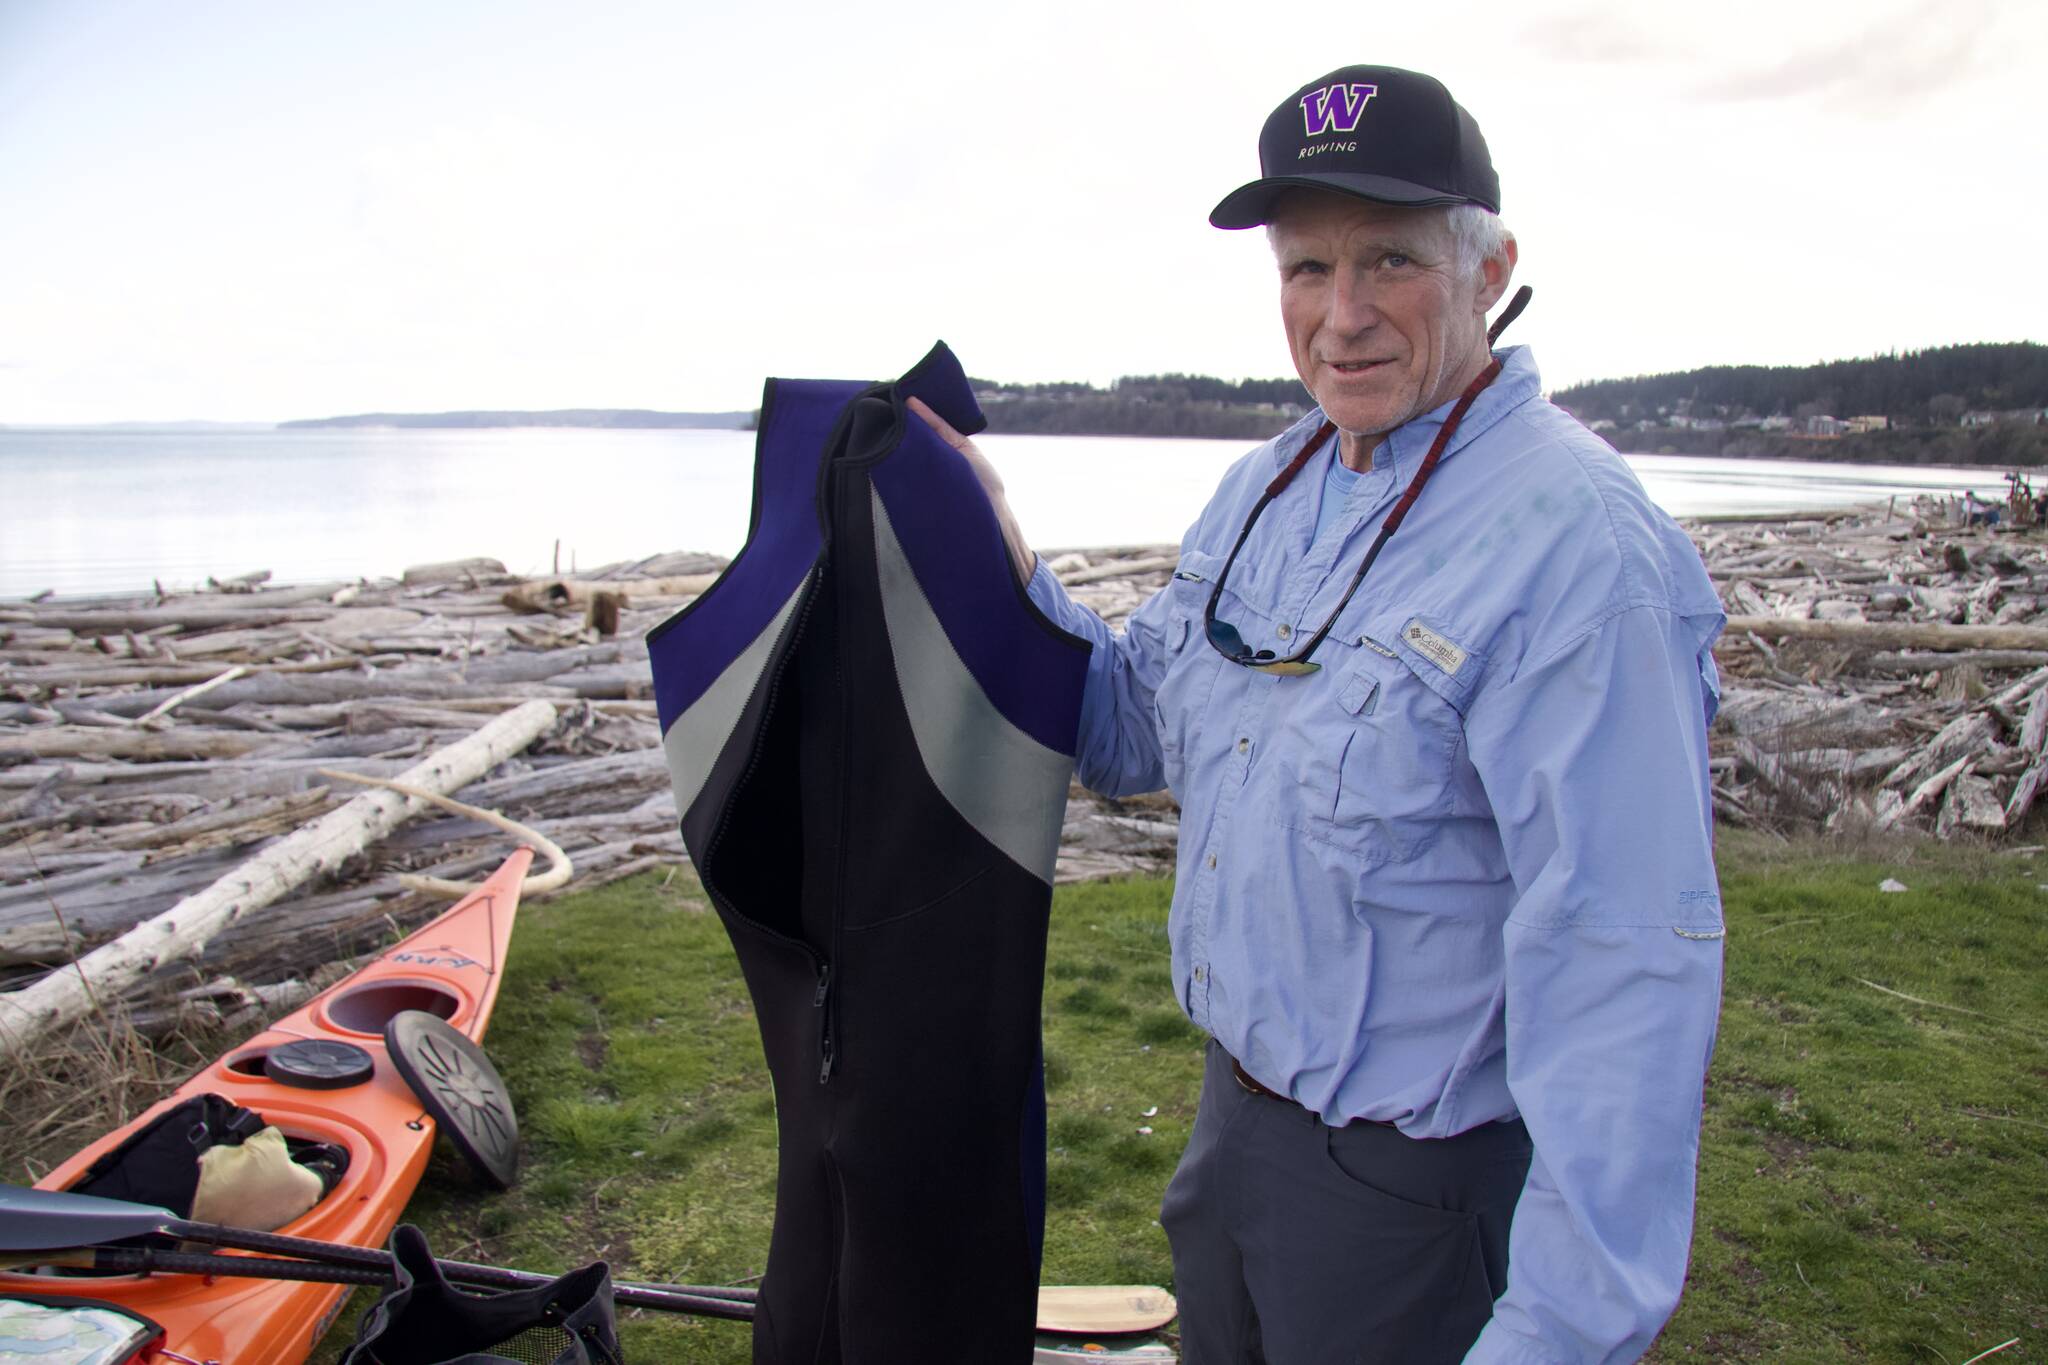 Photo by Rachel Rosen/Whidbey News-Times
Bill Walker explains the gear needed to go kayak camping.